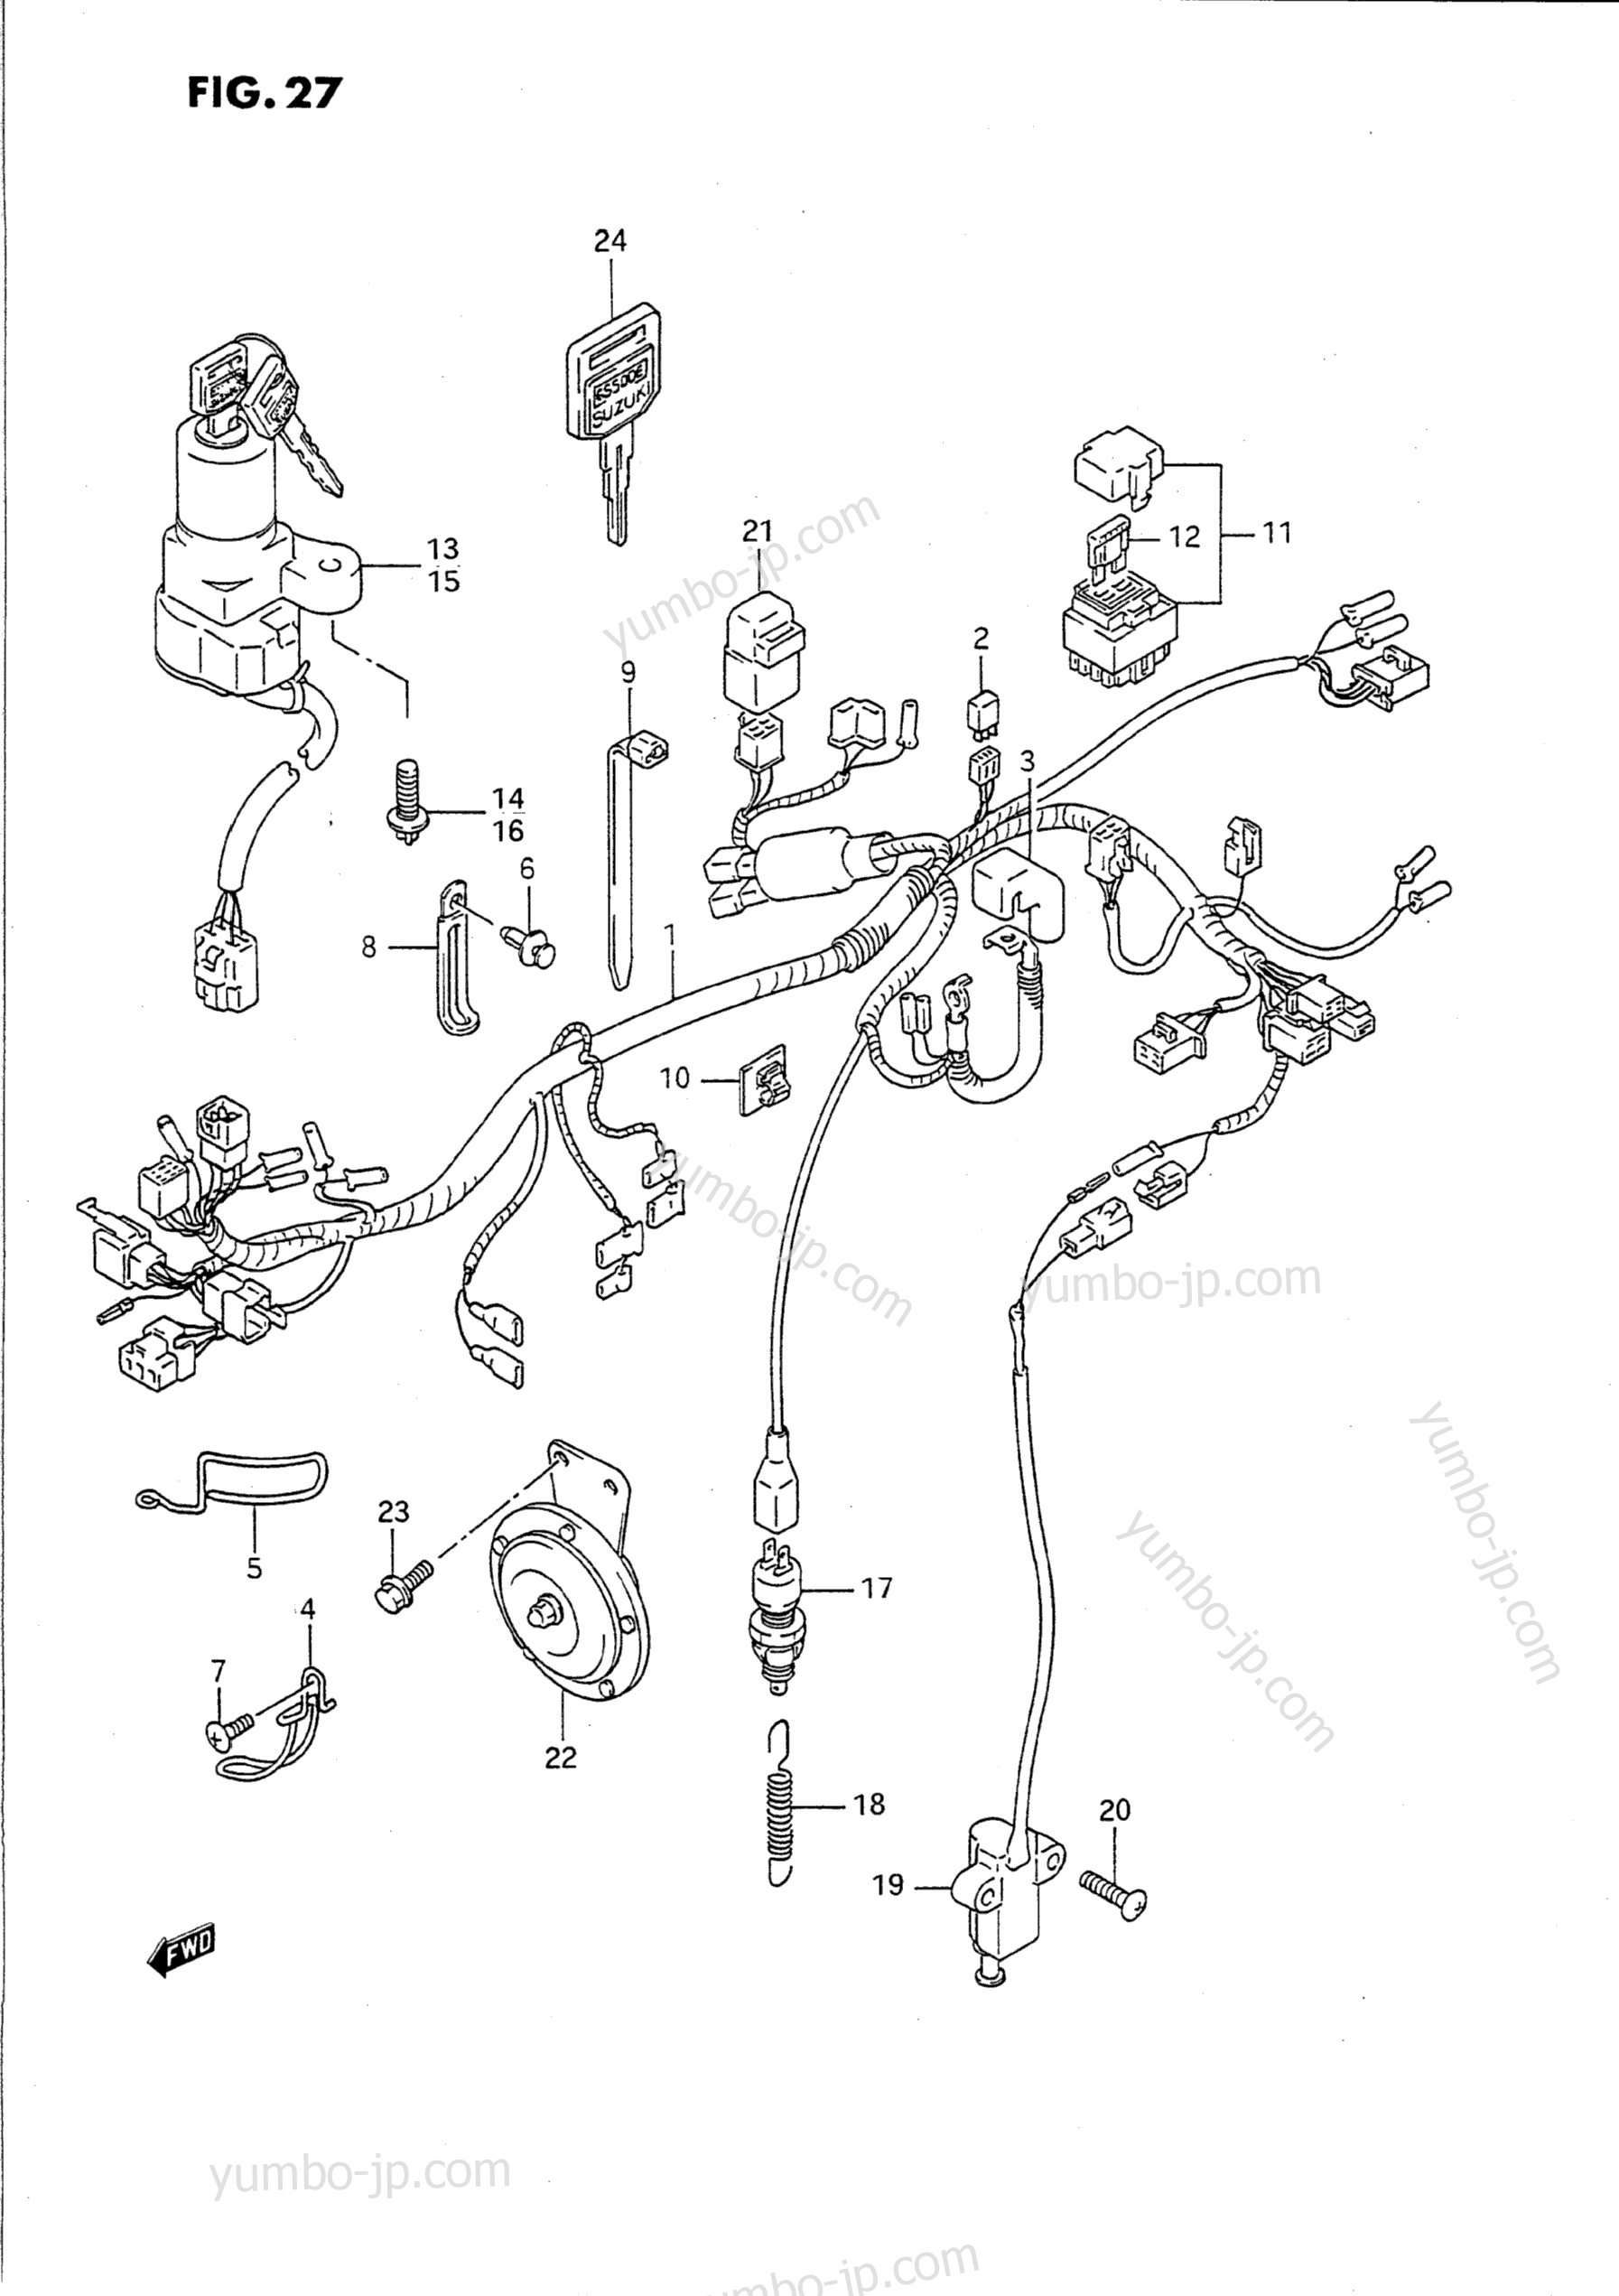 WIRING HARNESS for motorcycles SUZUKI GS500E 1995 year